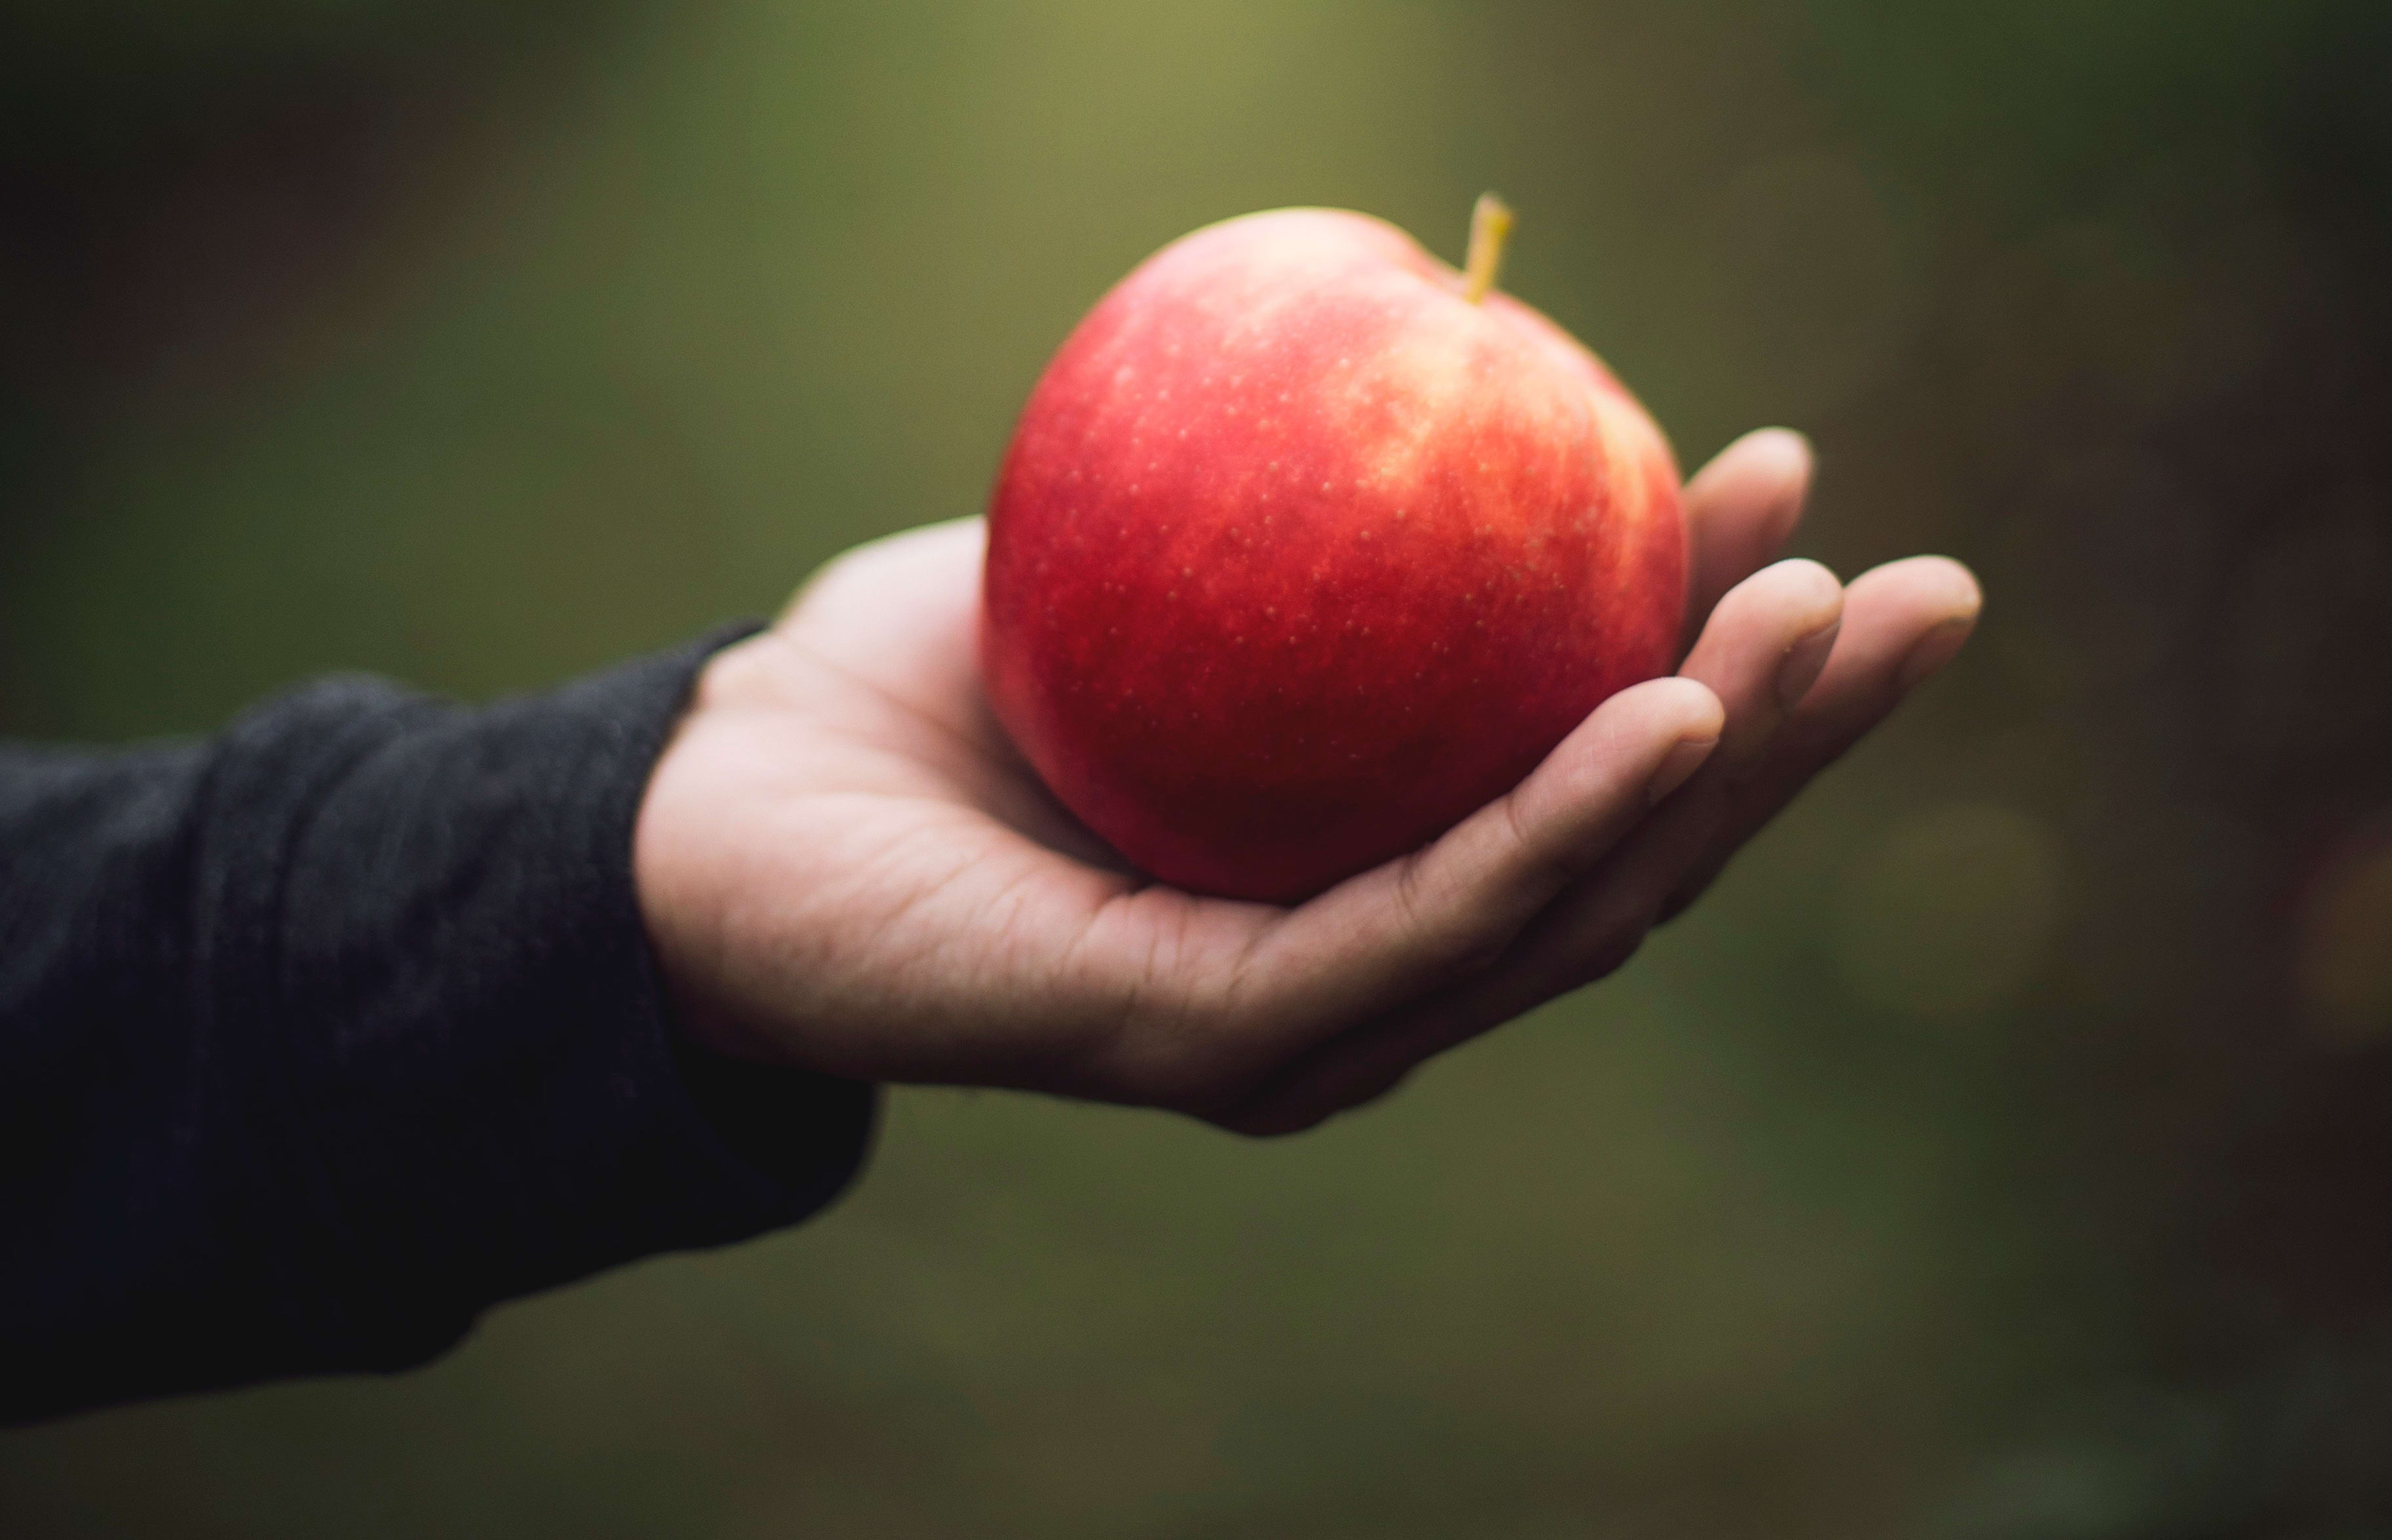 hand with apple